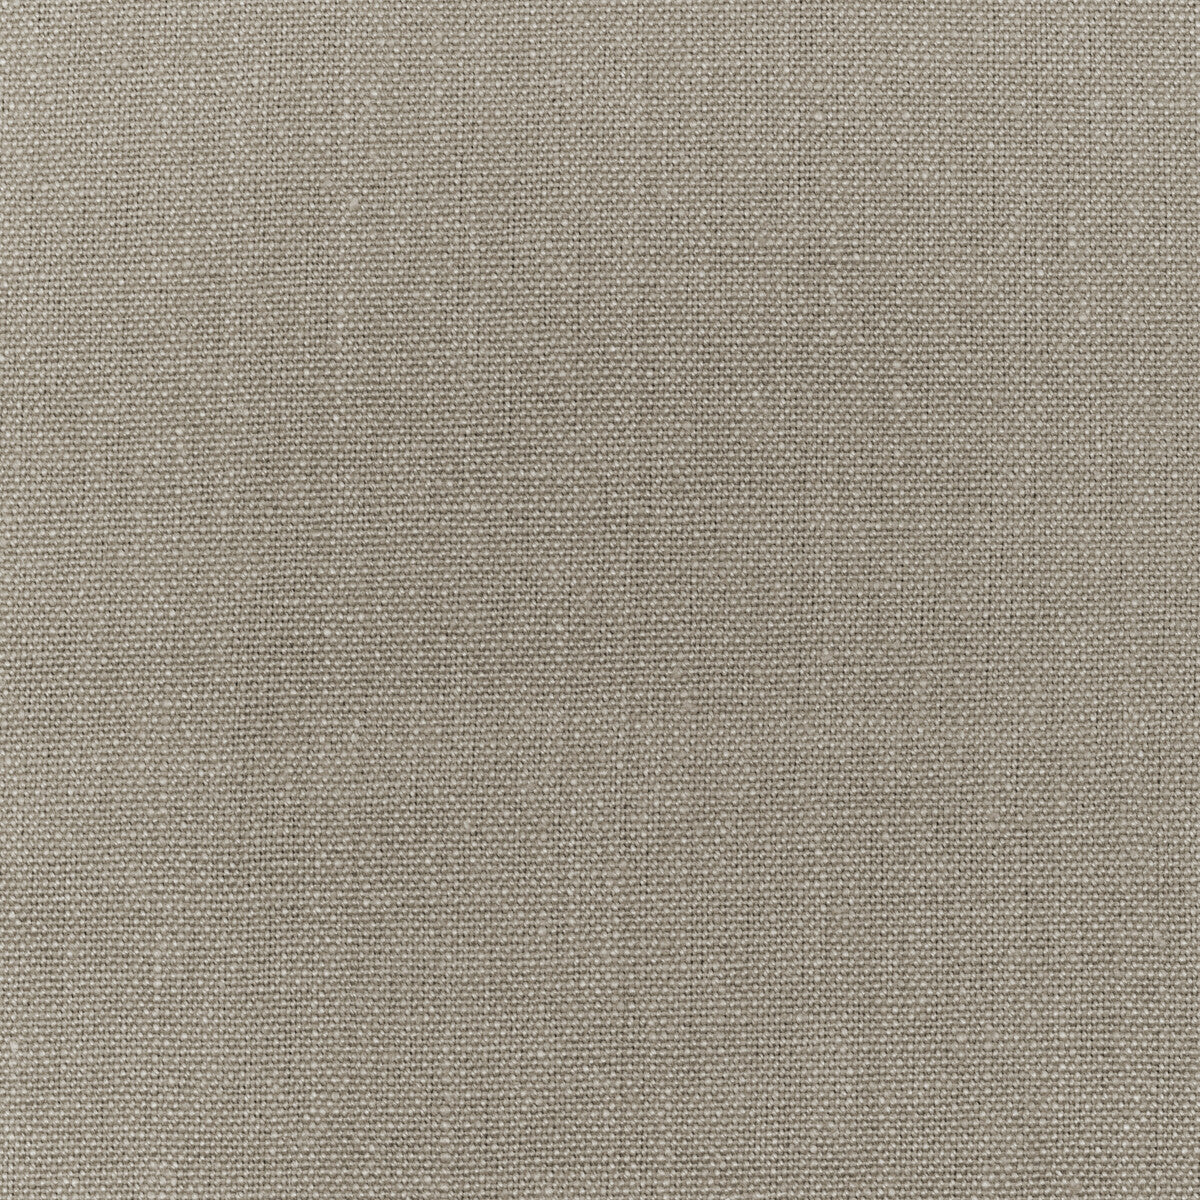 Watermill Linen fabric in dove color - pattern 2012176.11.0 - by Lee Jofa in the Colour Complements II collection